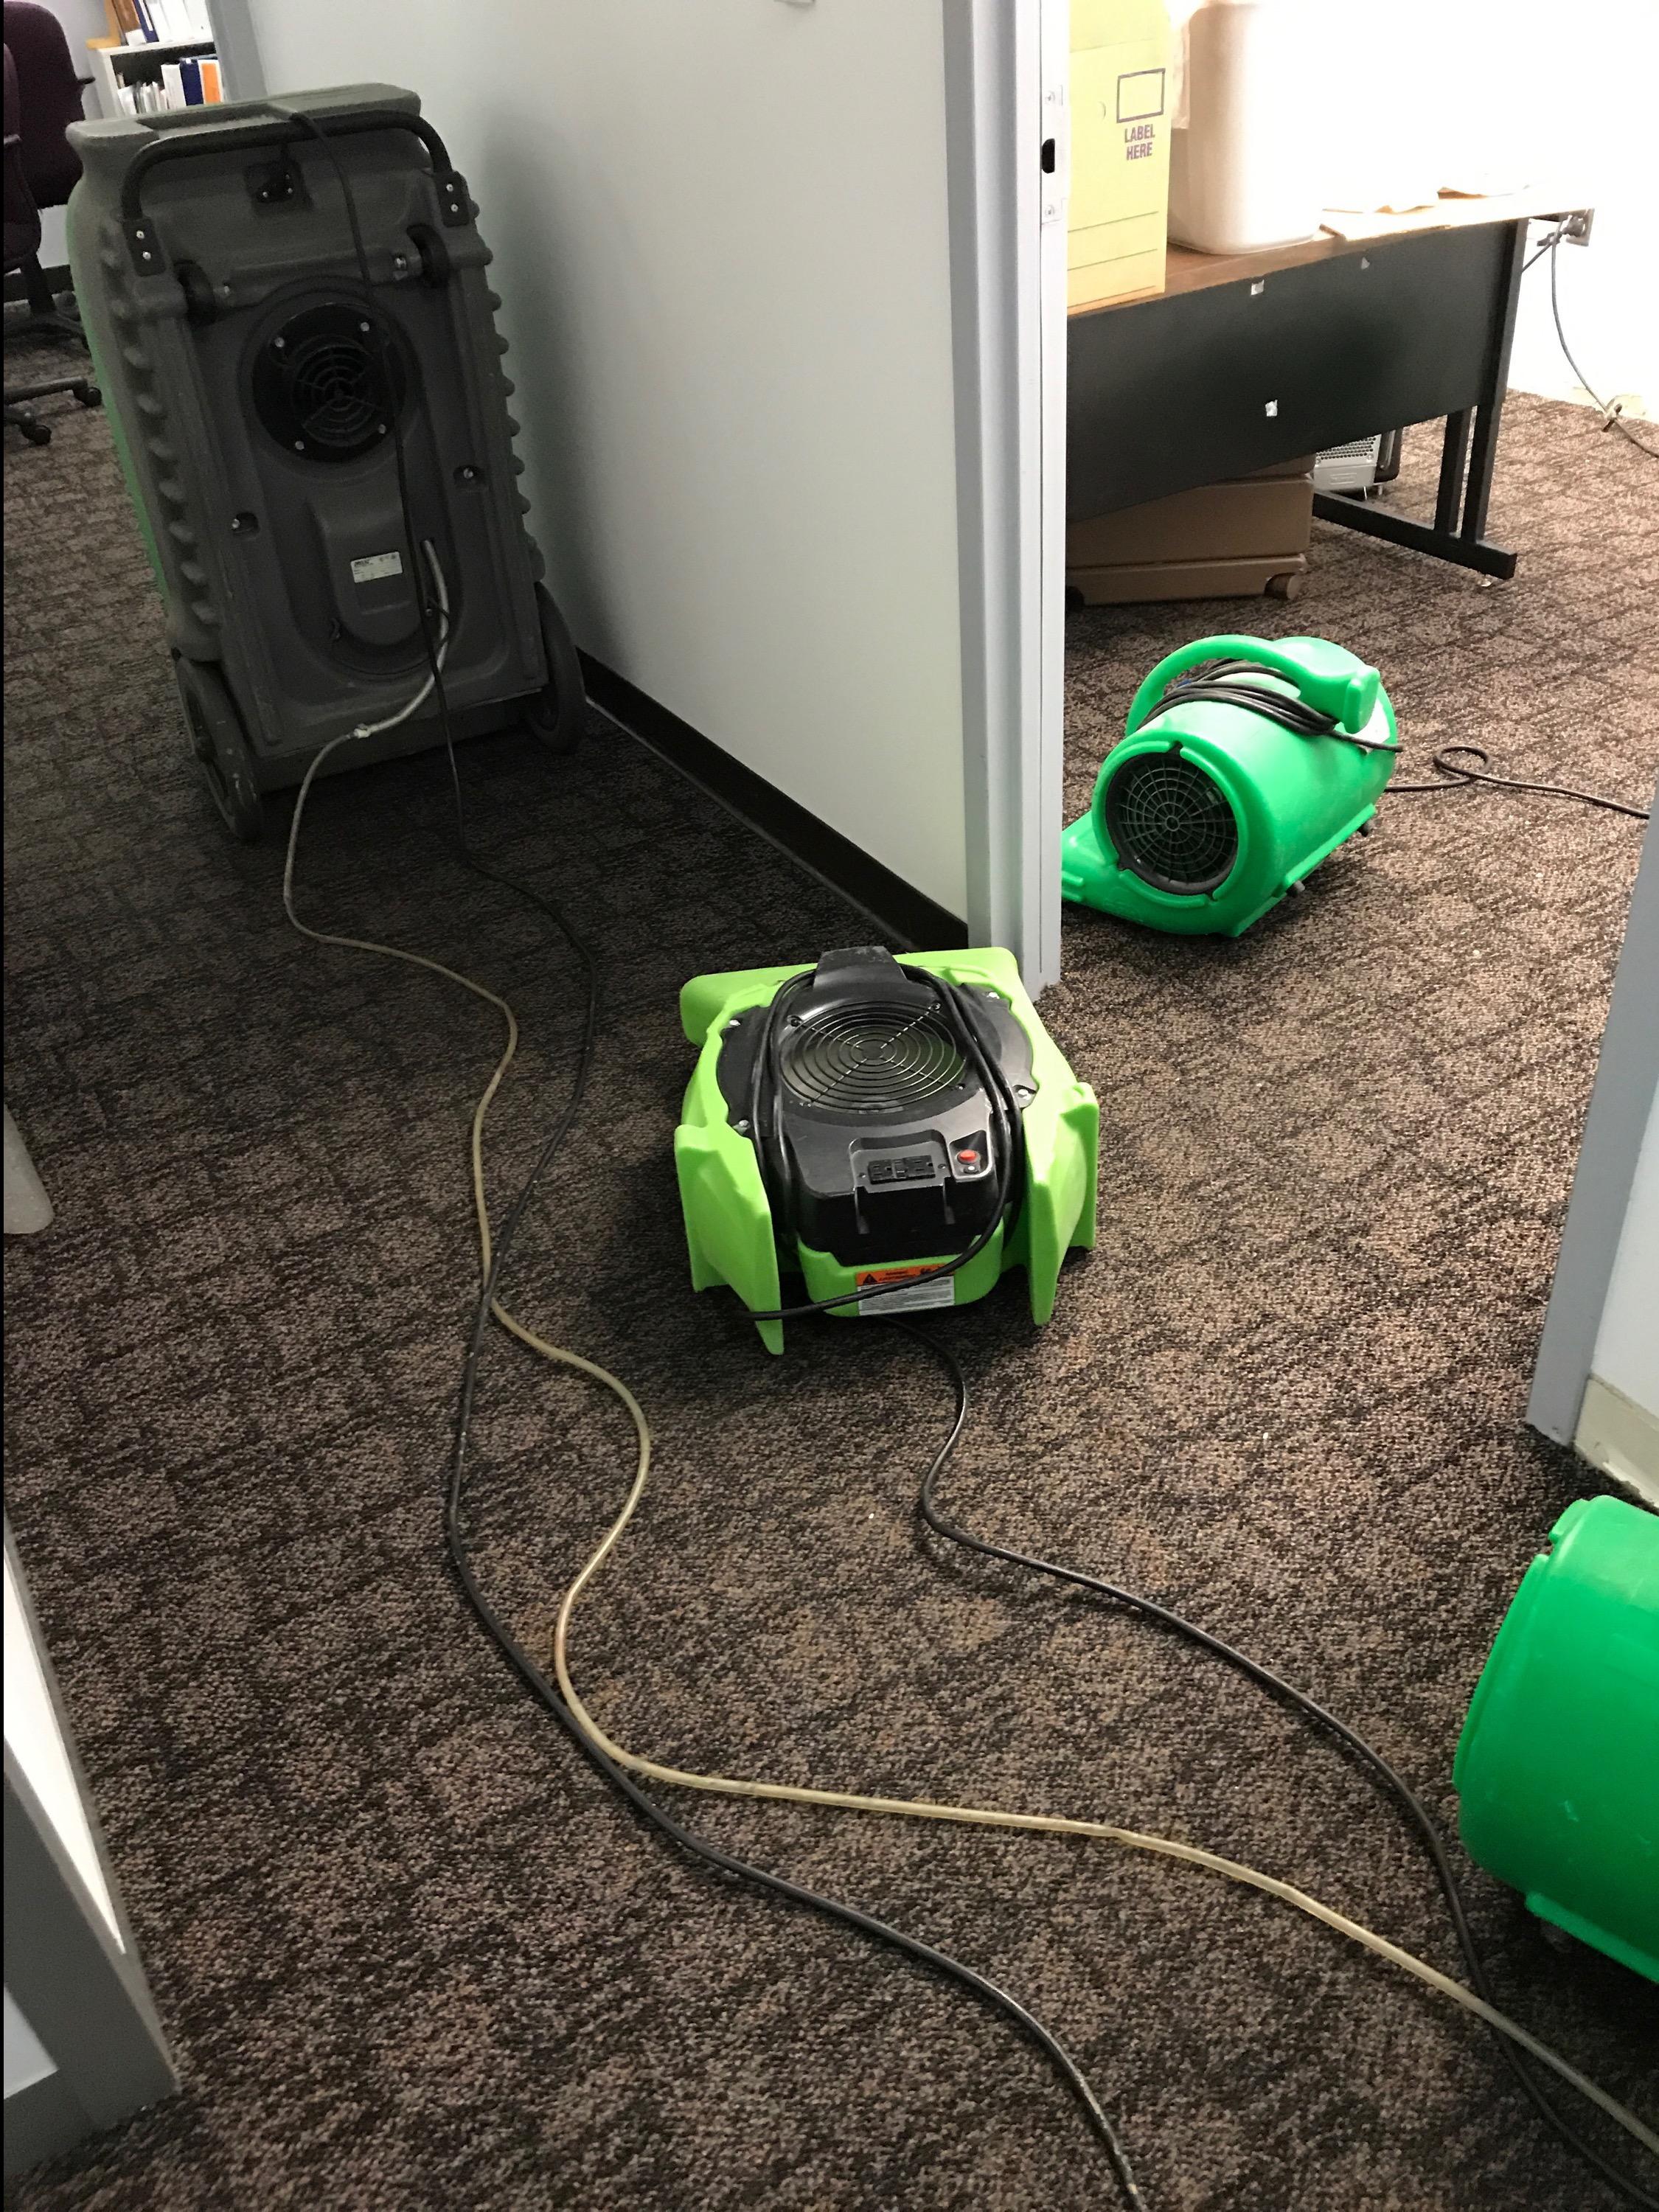 Fans and dehumidifiers were strategically places by our trained technicians to remove all of the water damage and moisture from this business in Canoga Park.